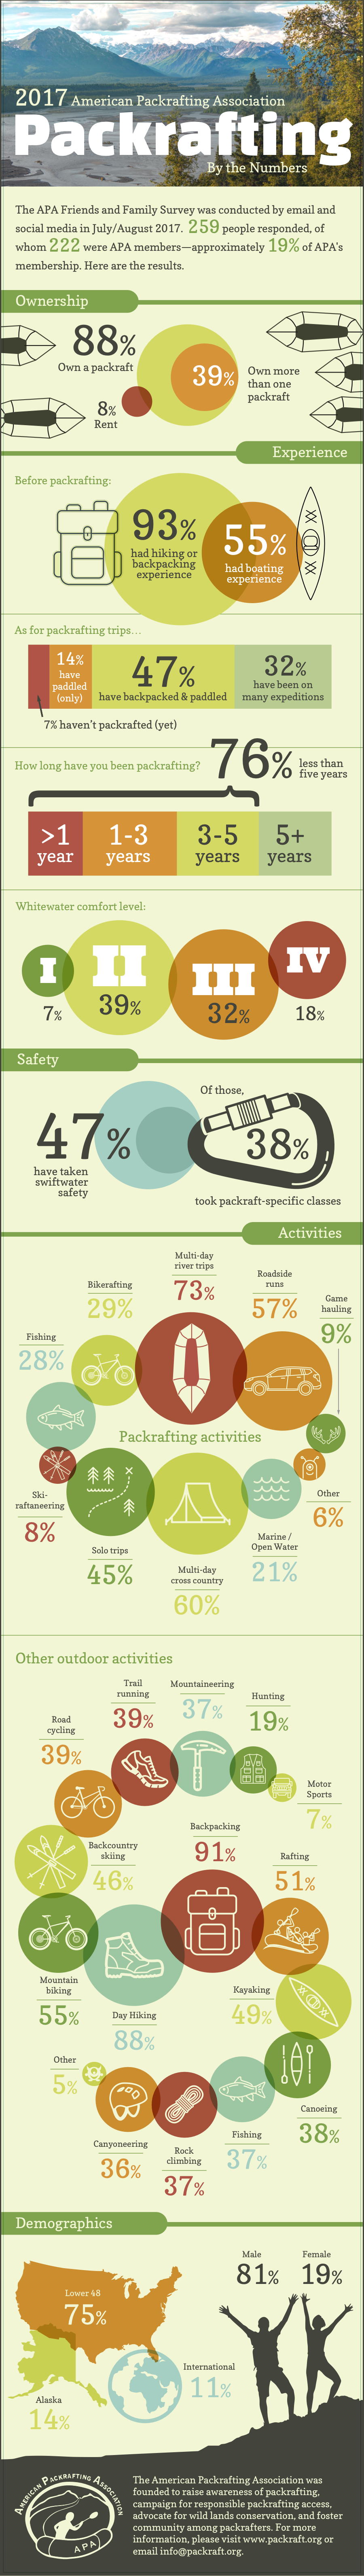 Packrafting Trends - Packrafting By The Numbers